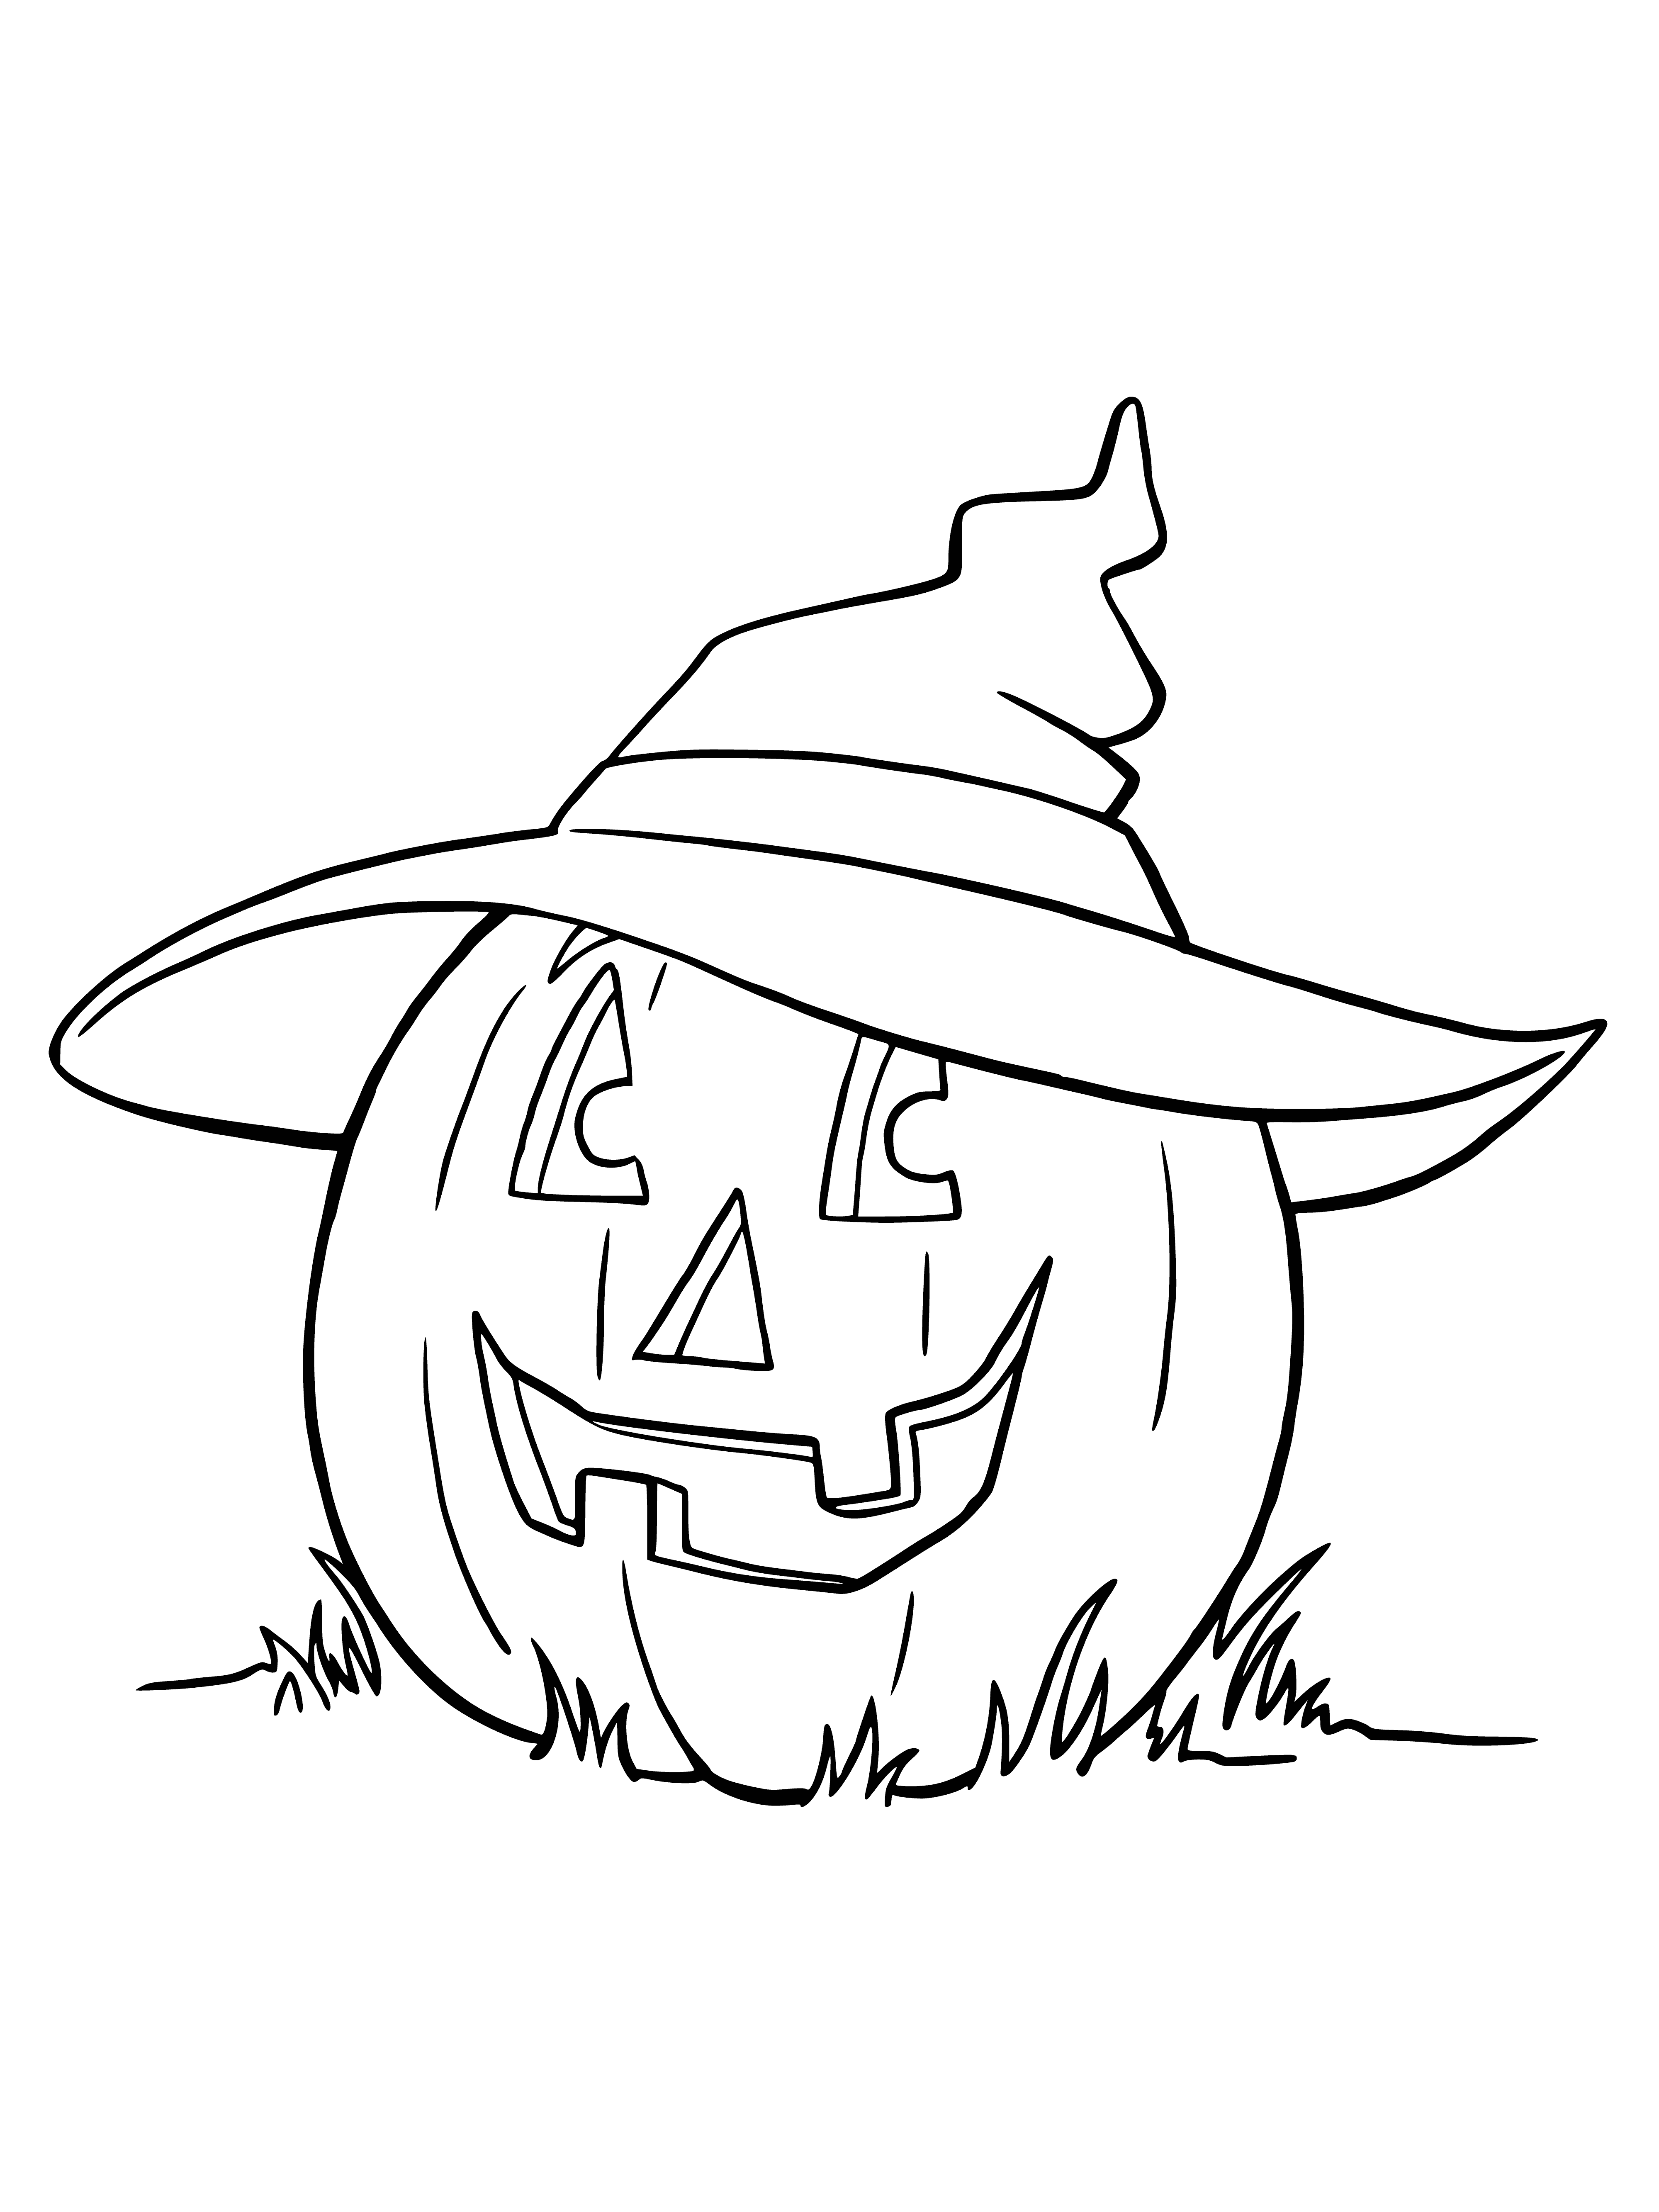 coloring page: Orange pumpkin with carving of face in open mouth, surrounded by leaves. Eyes are circles, nose a triangle, mouth a wide black line.